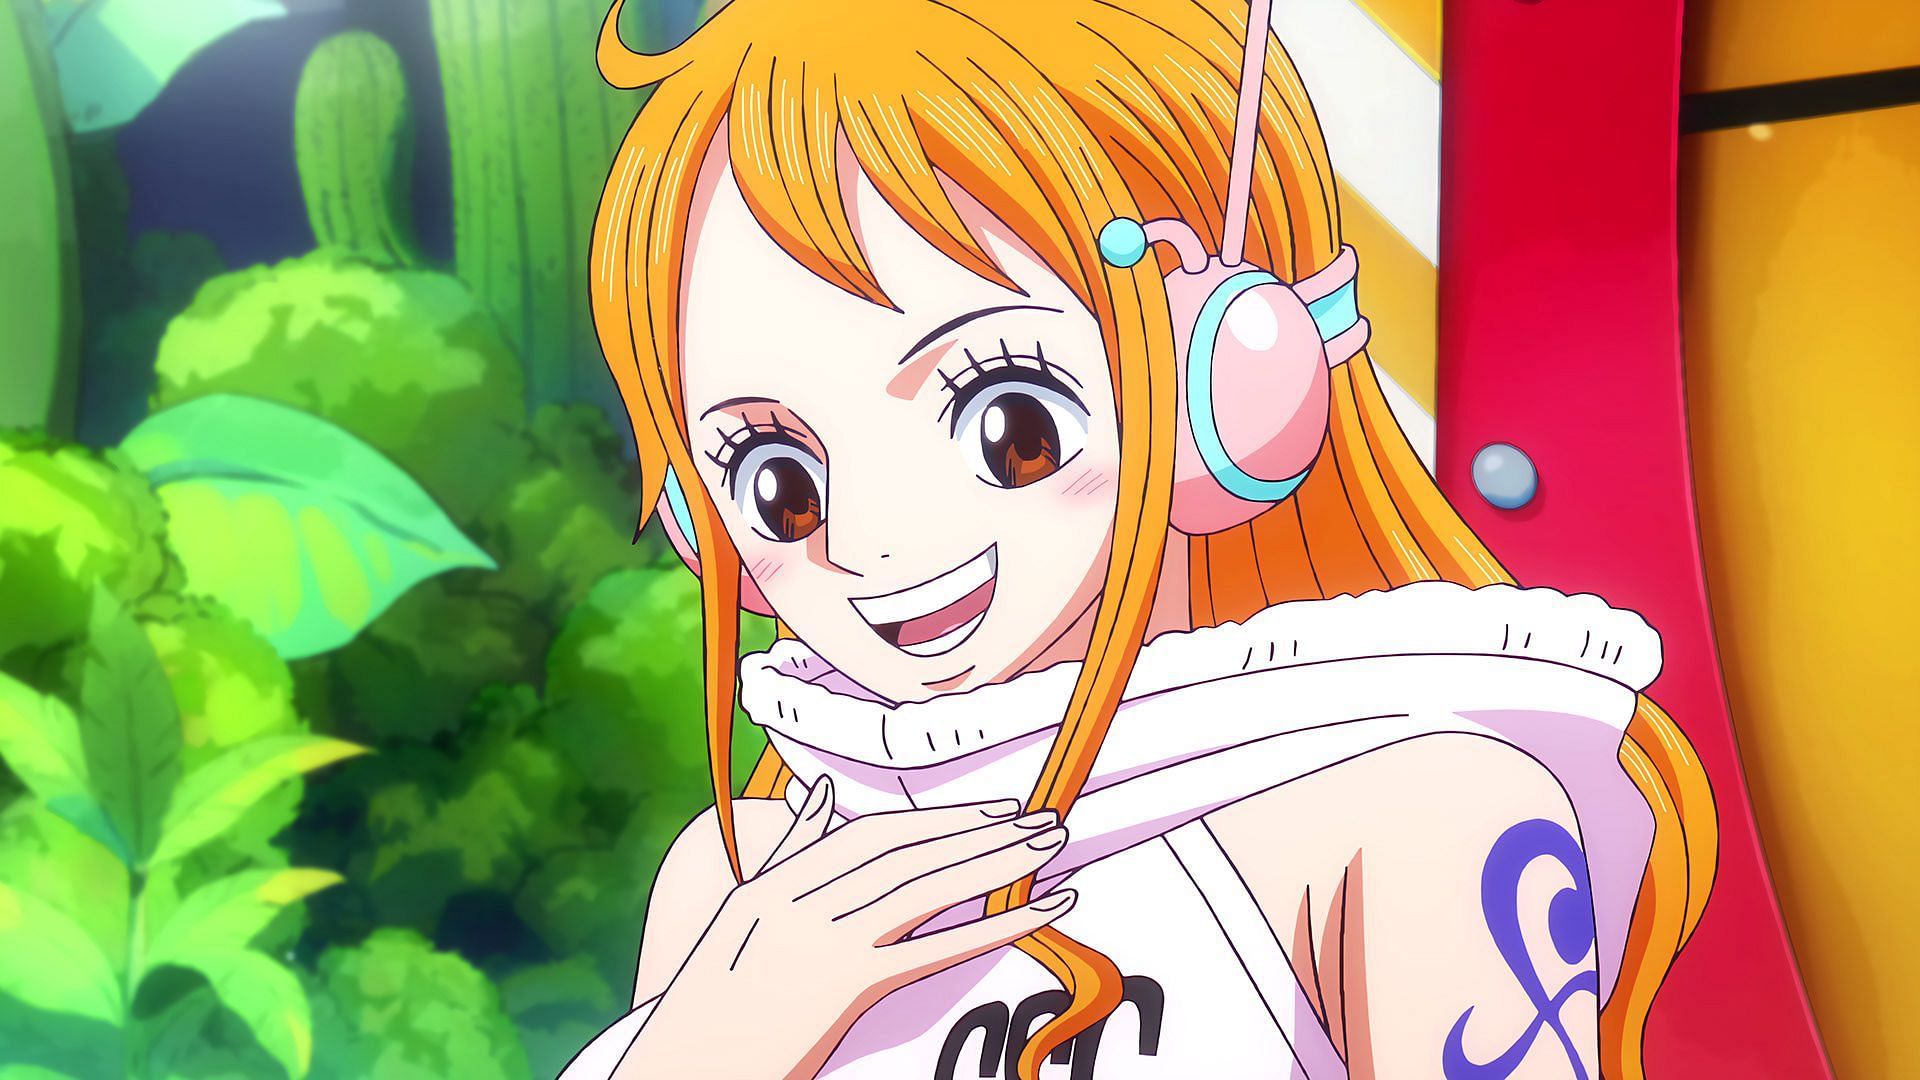 Nami as seen in the One Piece anime (Image via Toei Animation)